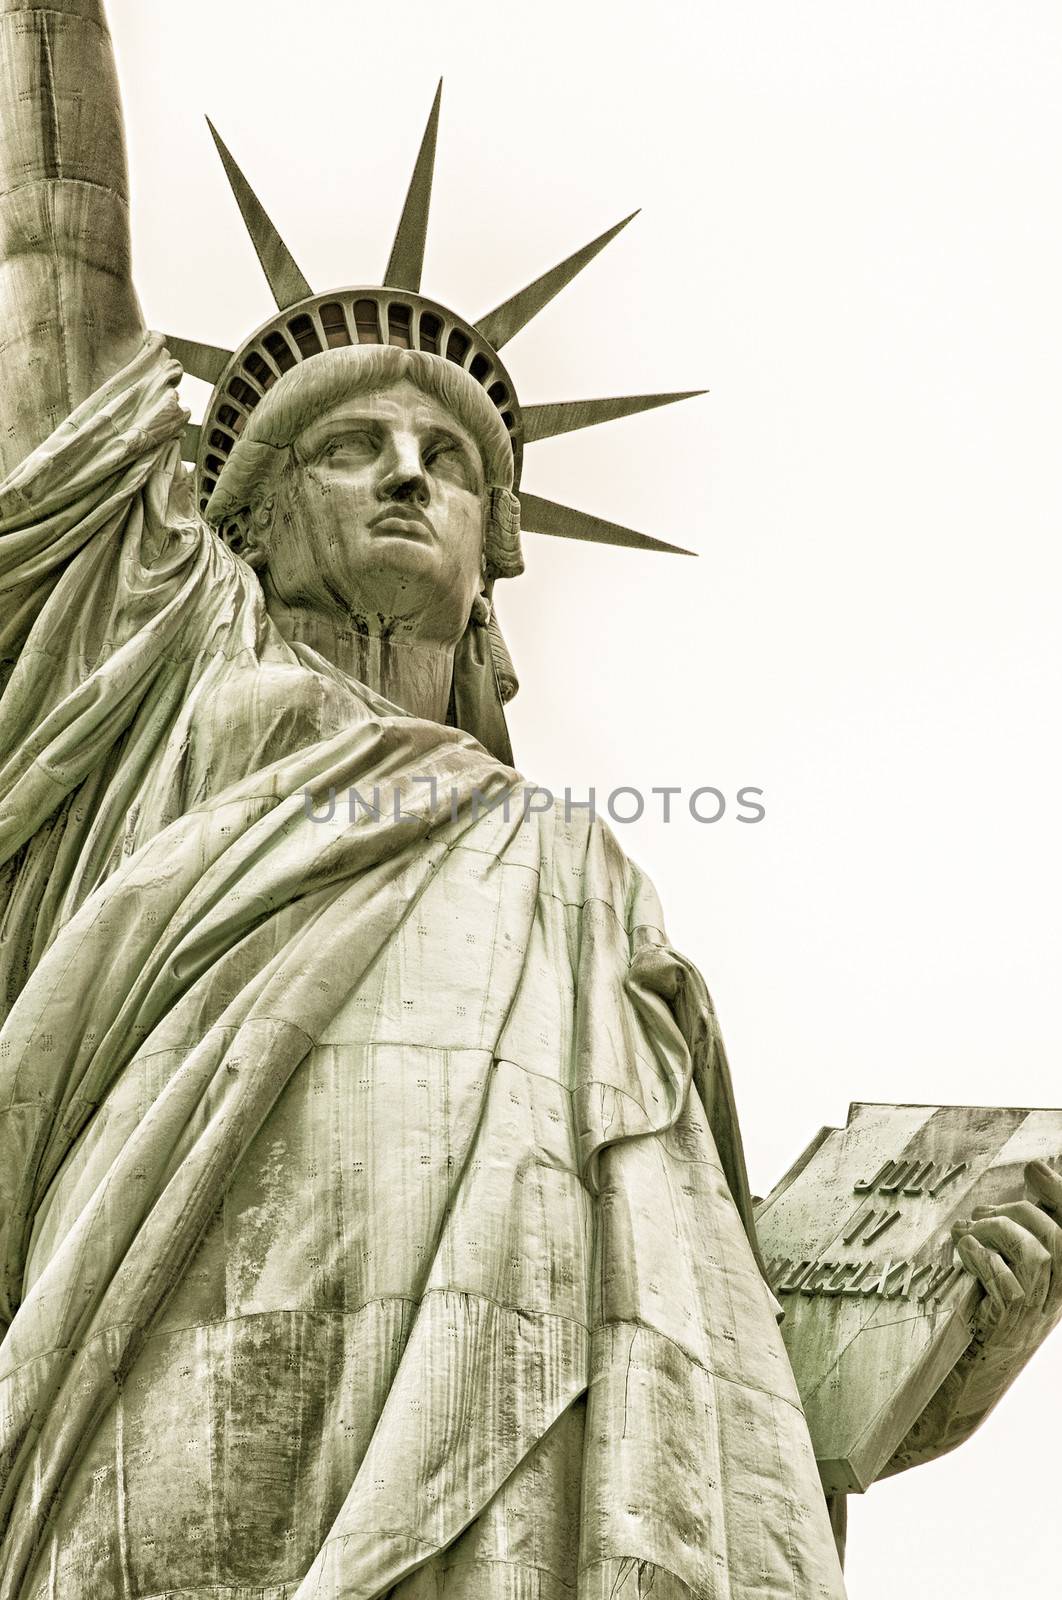 Low angle view of a statue, Statue Of Liberty, Liberty Island, New York City, New York State, USA